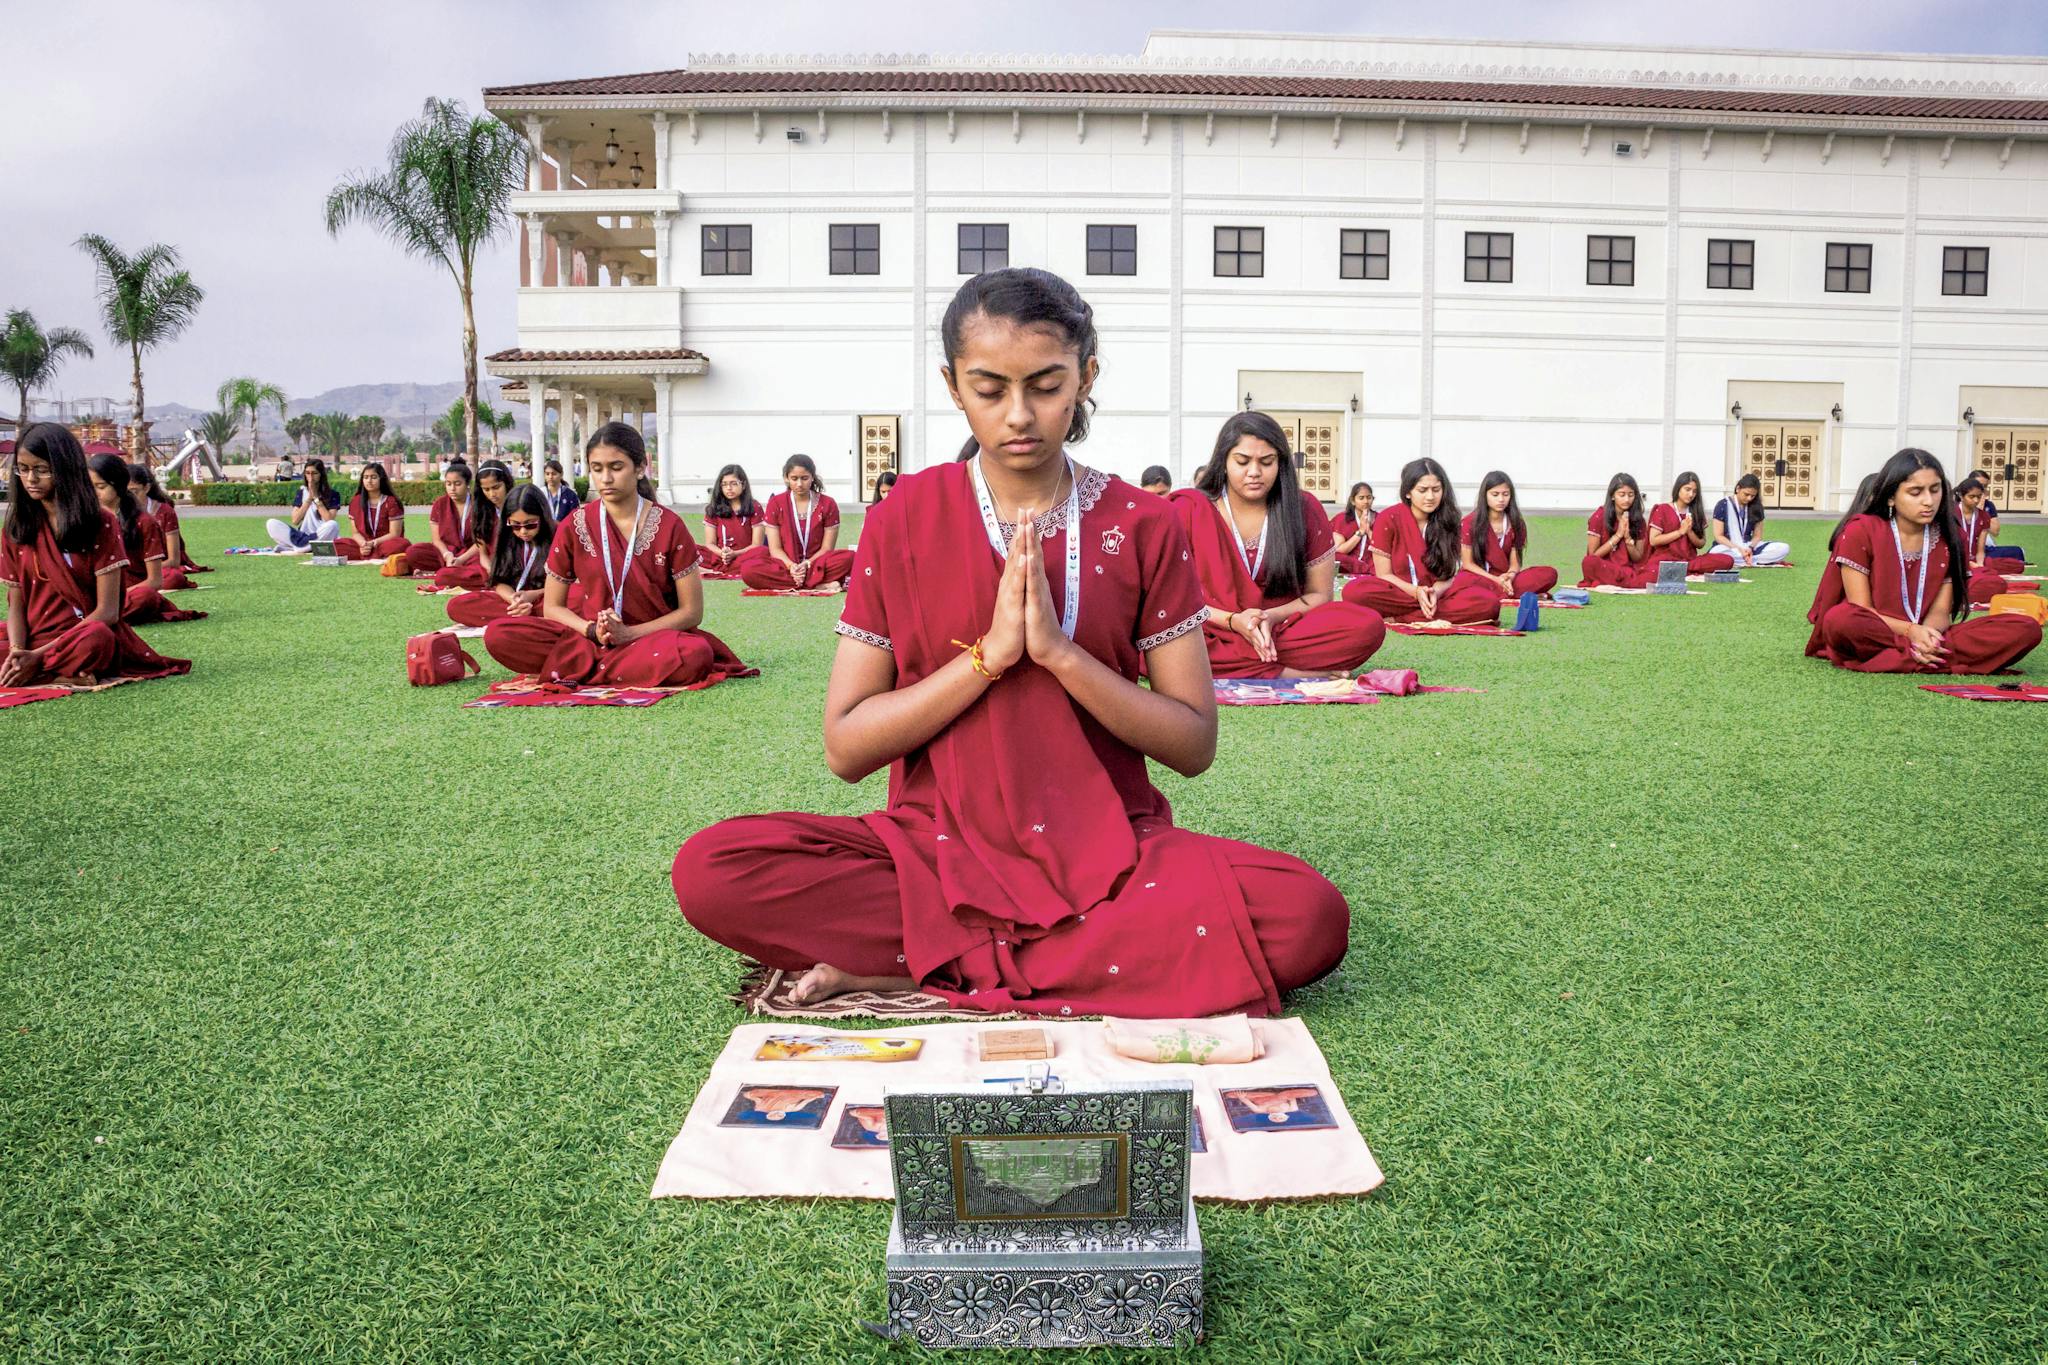 A group of female devotees perform their morning puja together in Chino Hills, California.